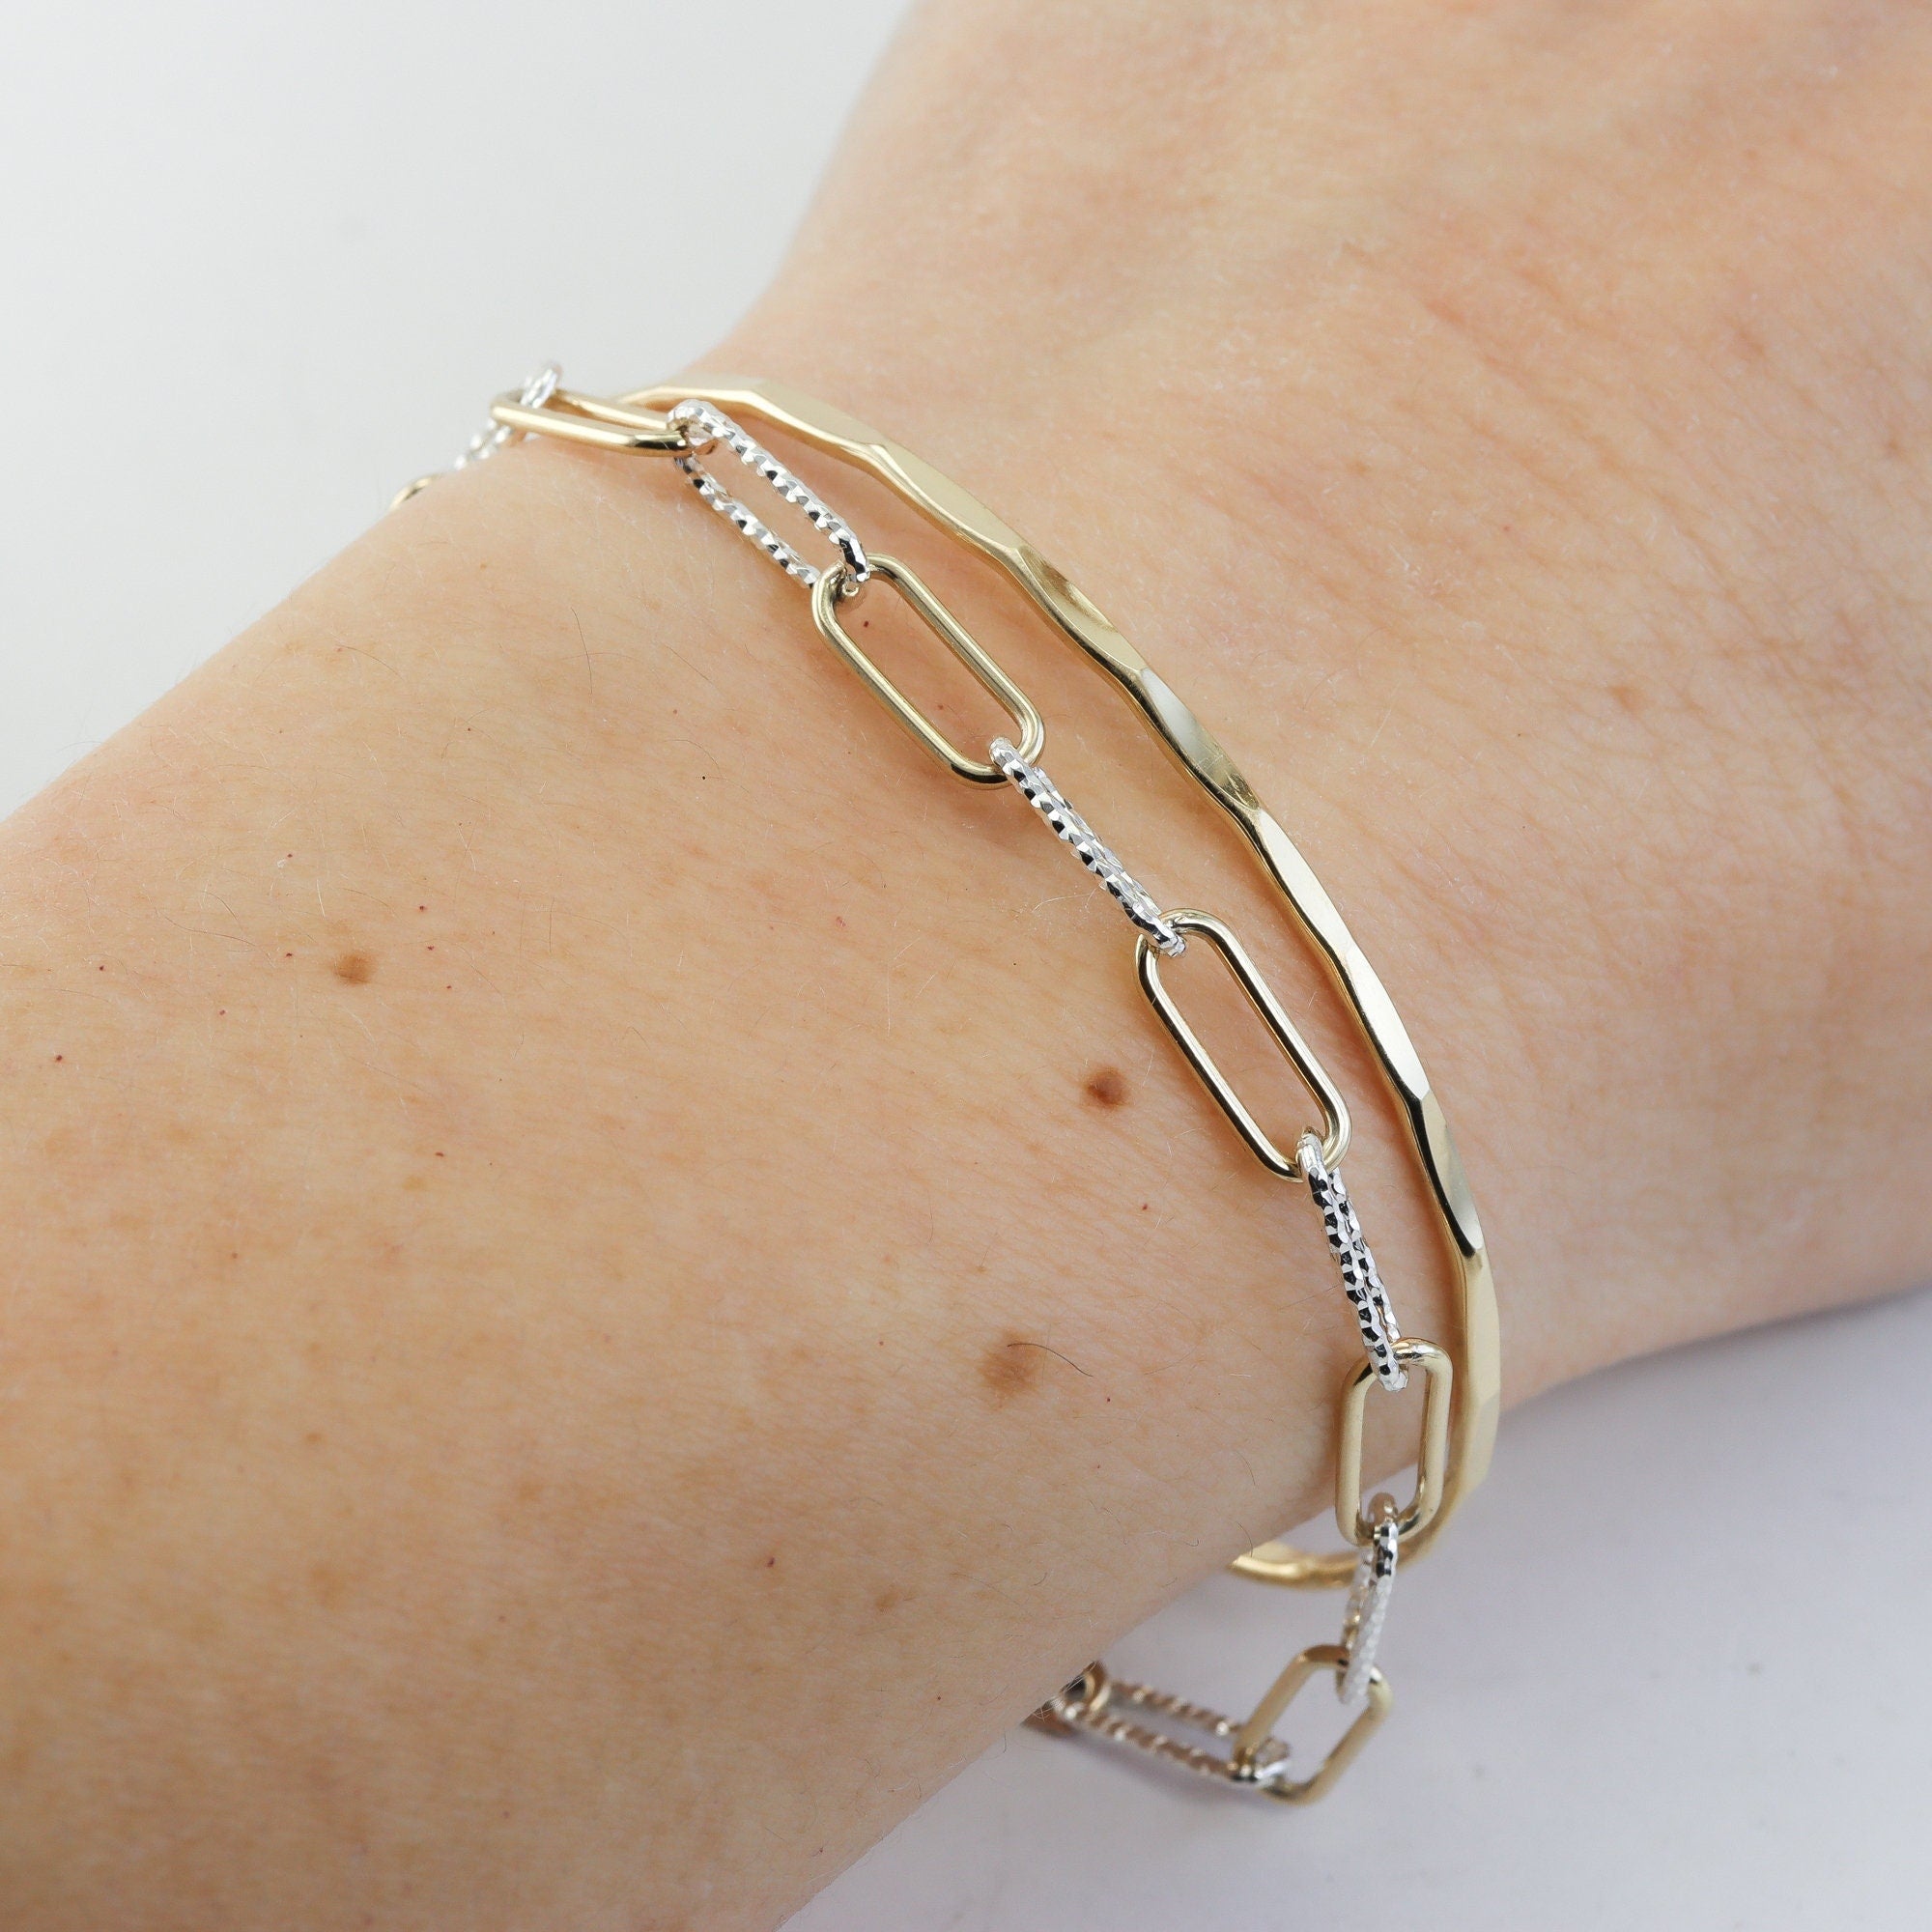 Chunky Paperclip Chain Bracelet in Gold and Silver - Mixed Metals Charm Bracelet with Sparkle Faceting